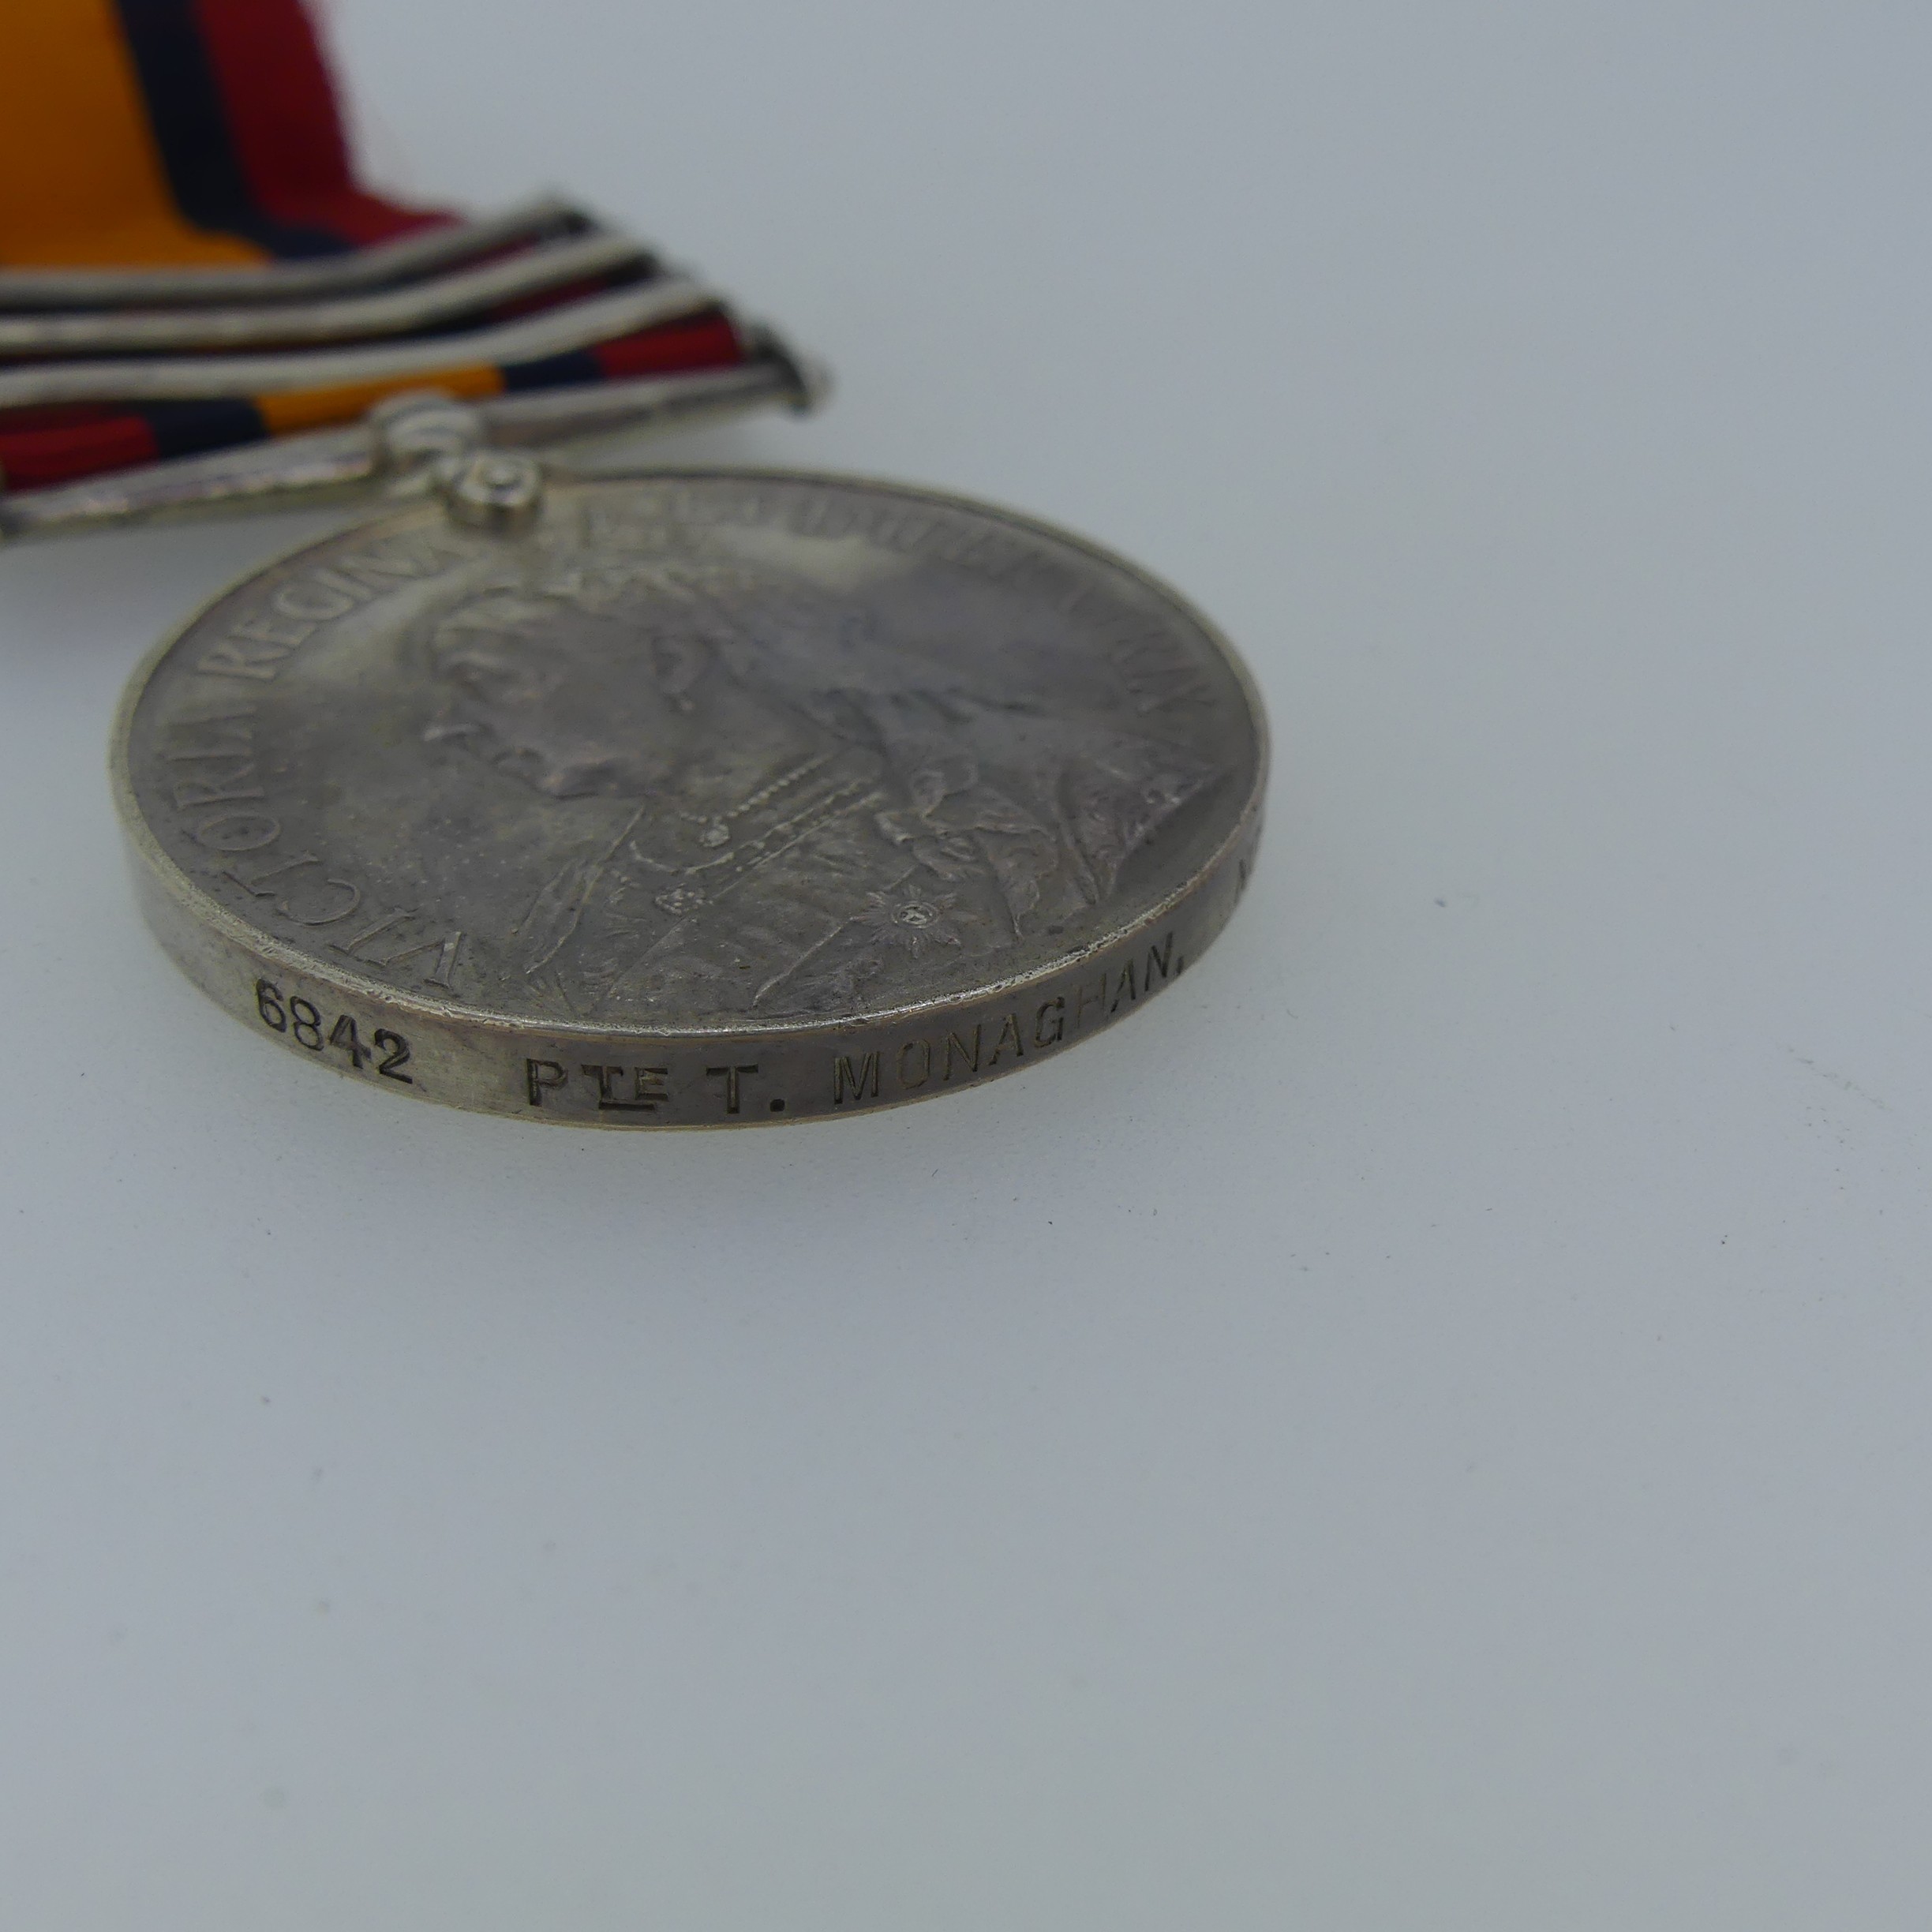 Queen's South Africa Medal (Three clasps: Transvaal, Orange Free State, Cape Colony) 6842 Pte T. - Image 4 of 5